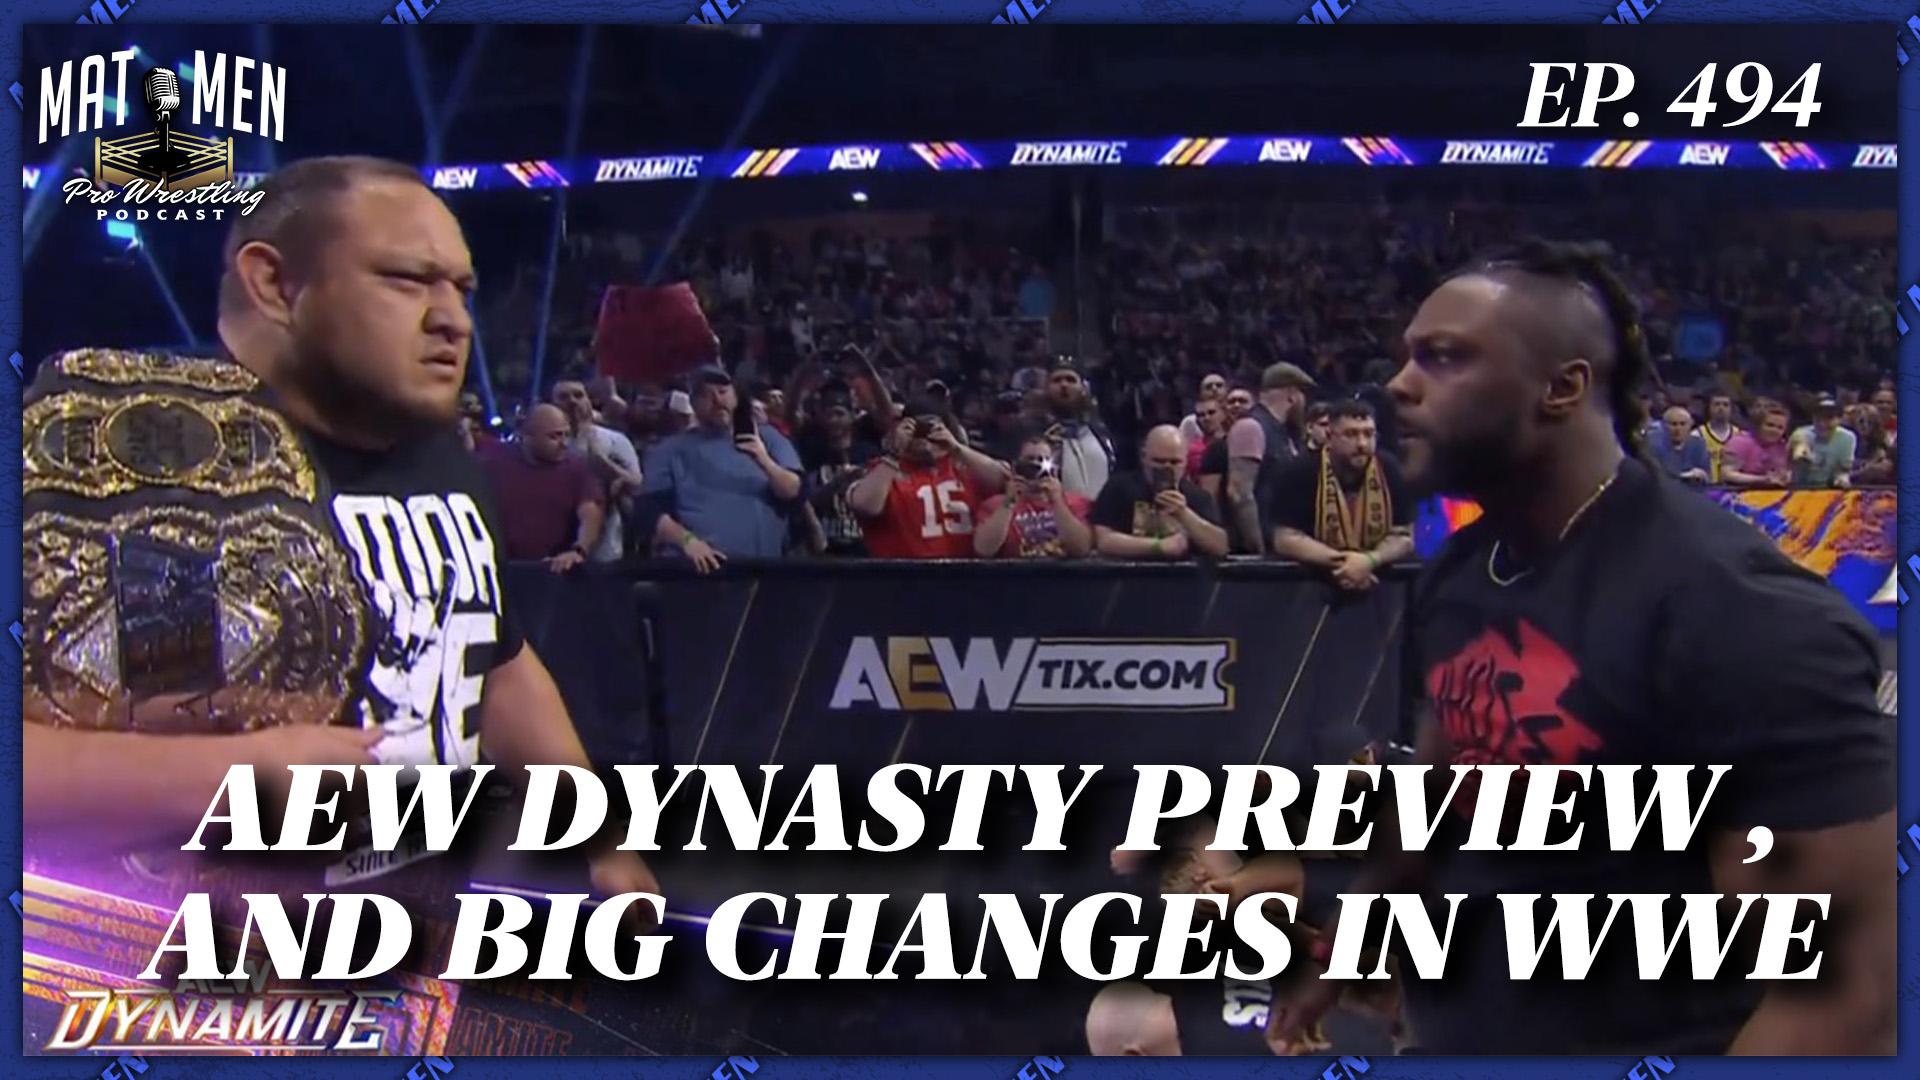 Mat Men Ep. 494 - AEW Dynasty Preview, and Big Changes in WWE!